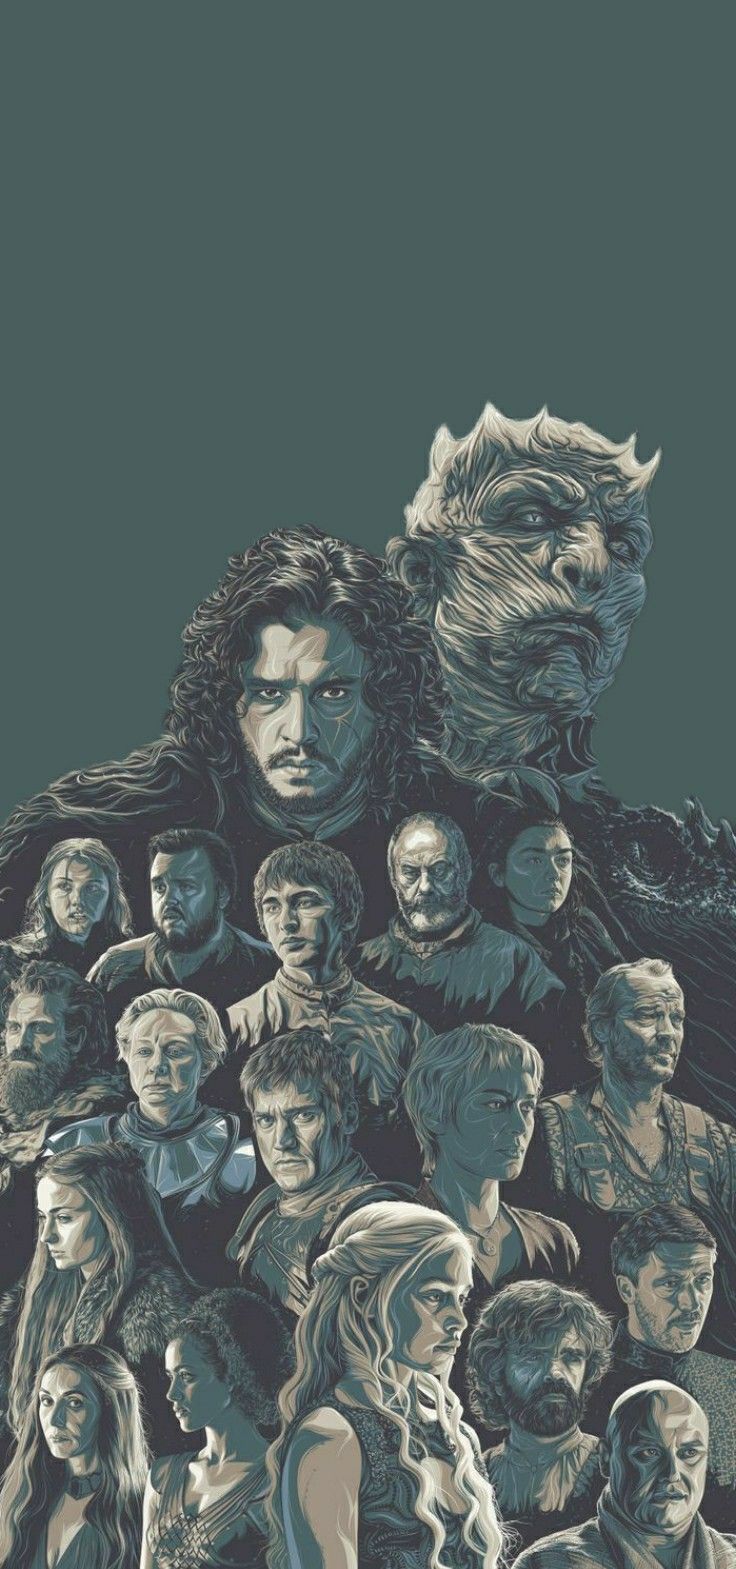 Game Of Thrones Wallpaper - NawPic